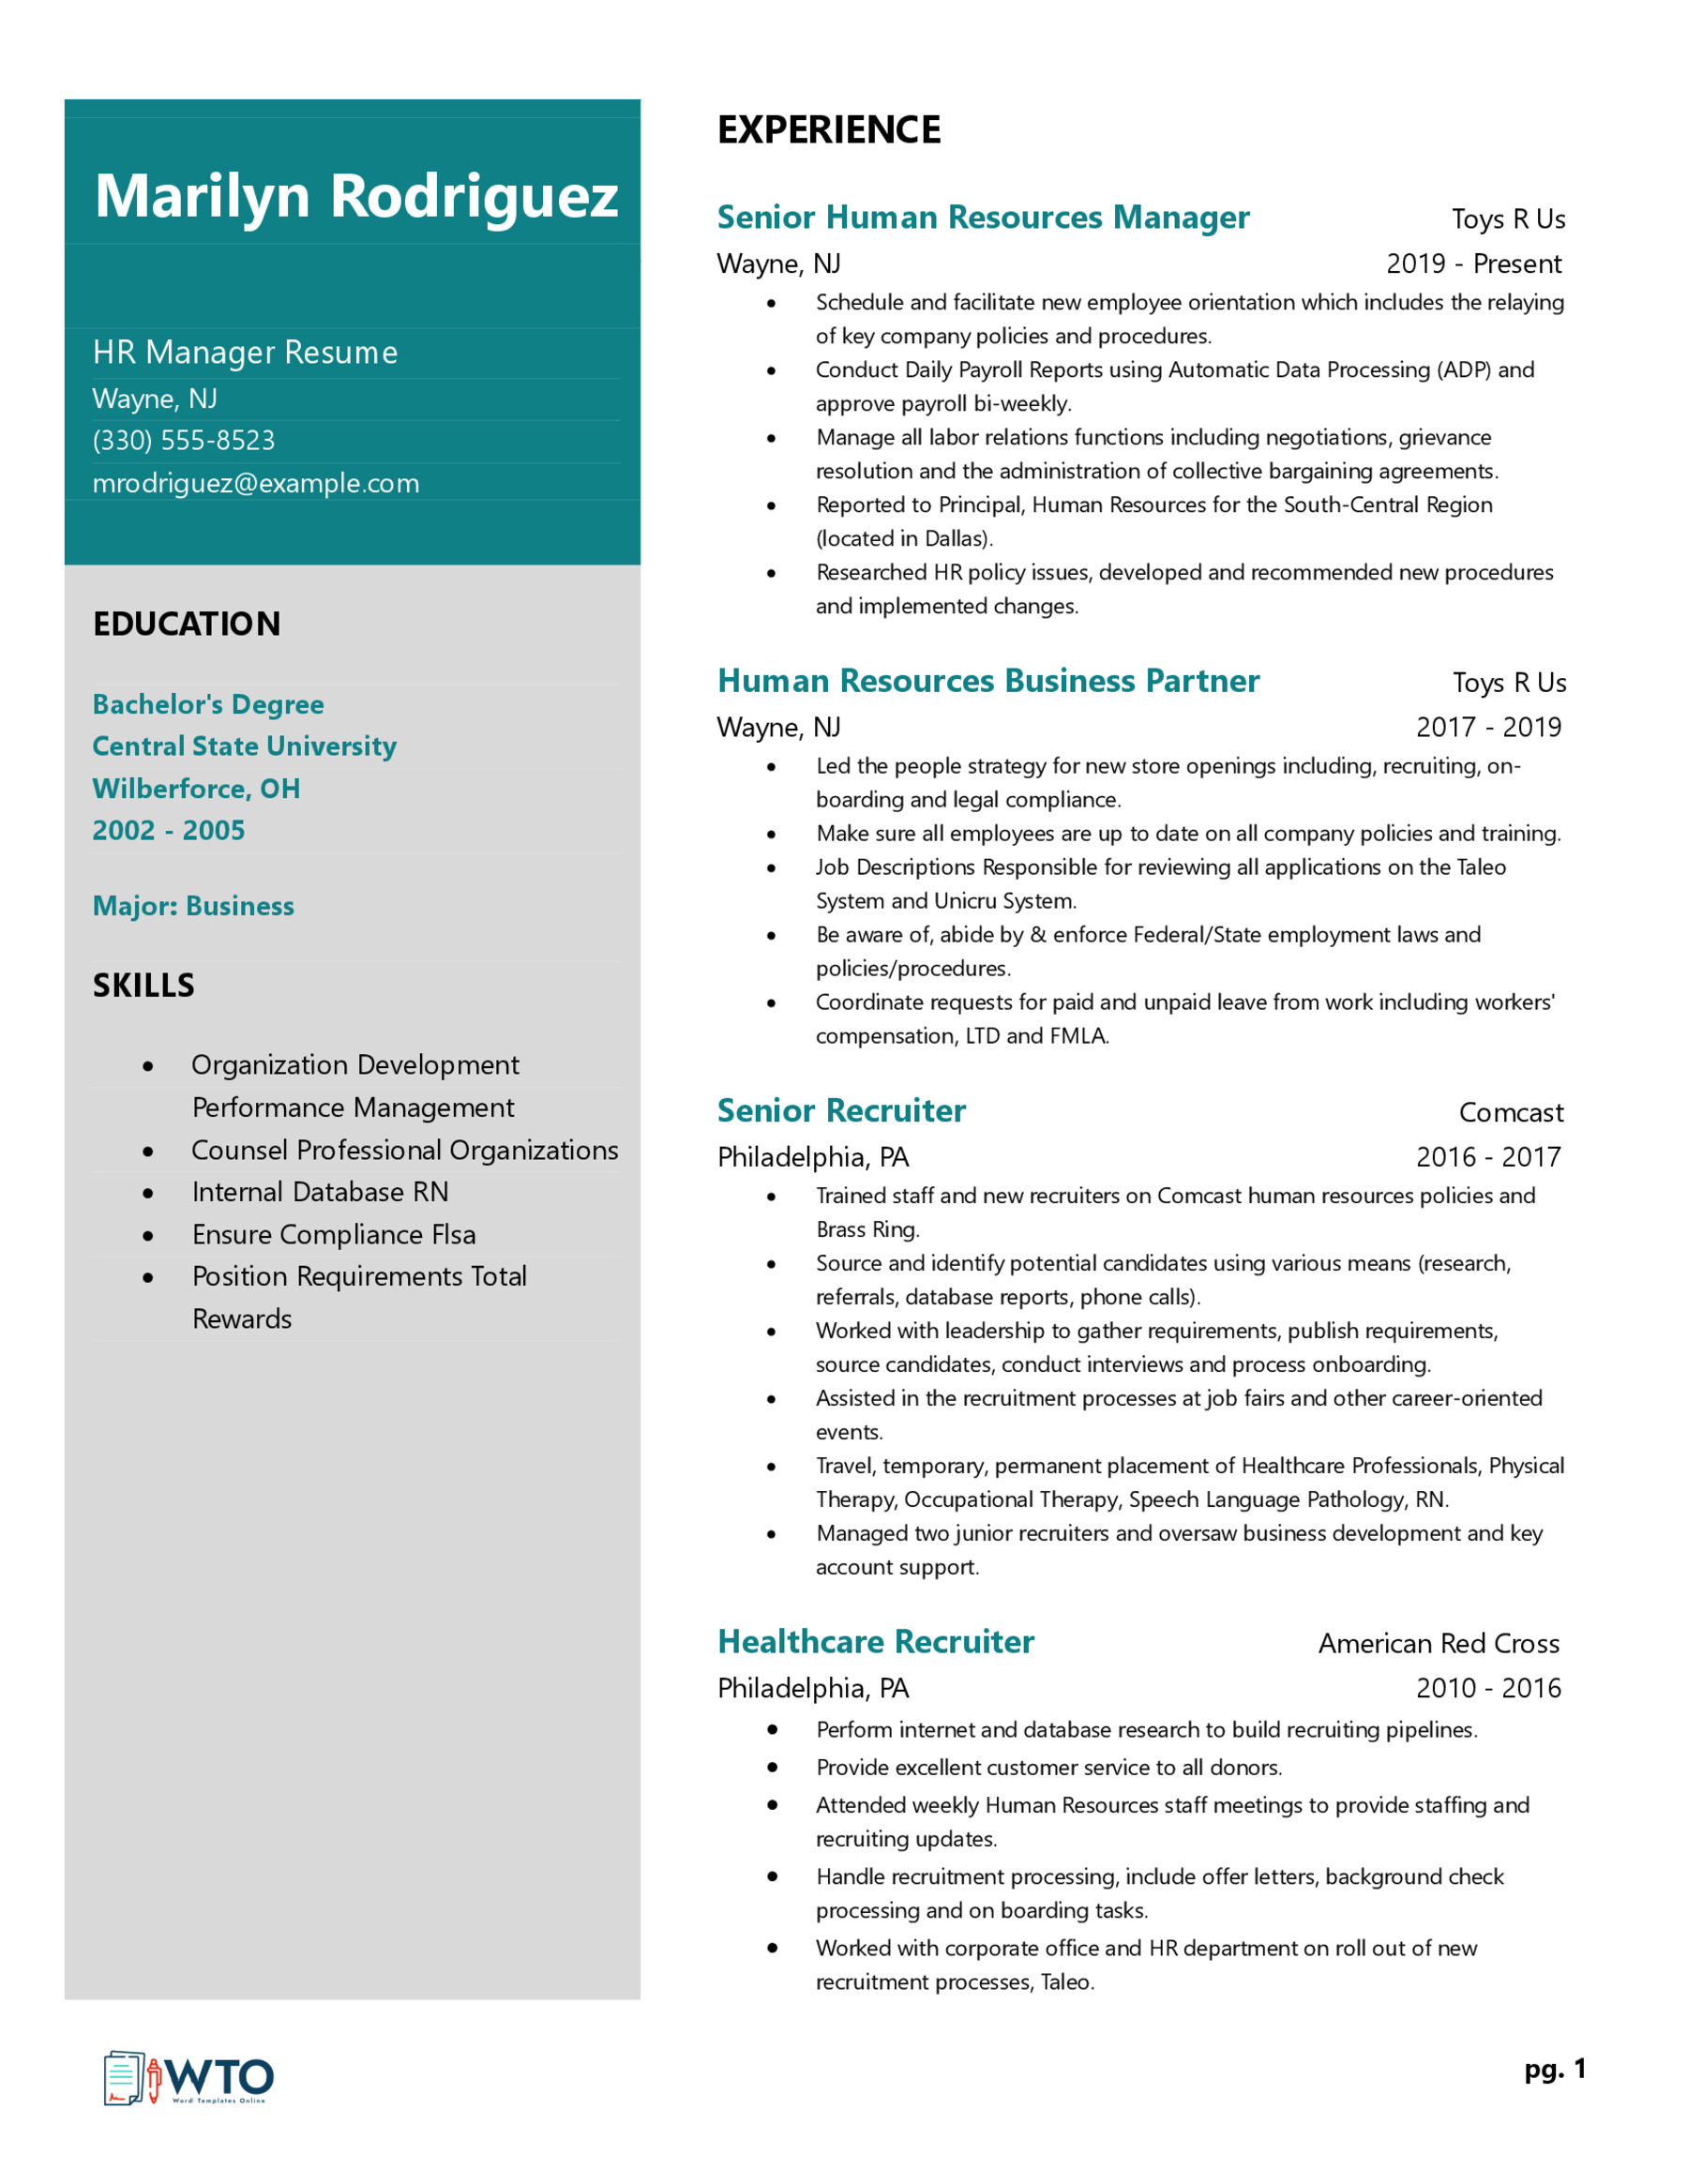 HR Manager Resume Example - Effective Format